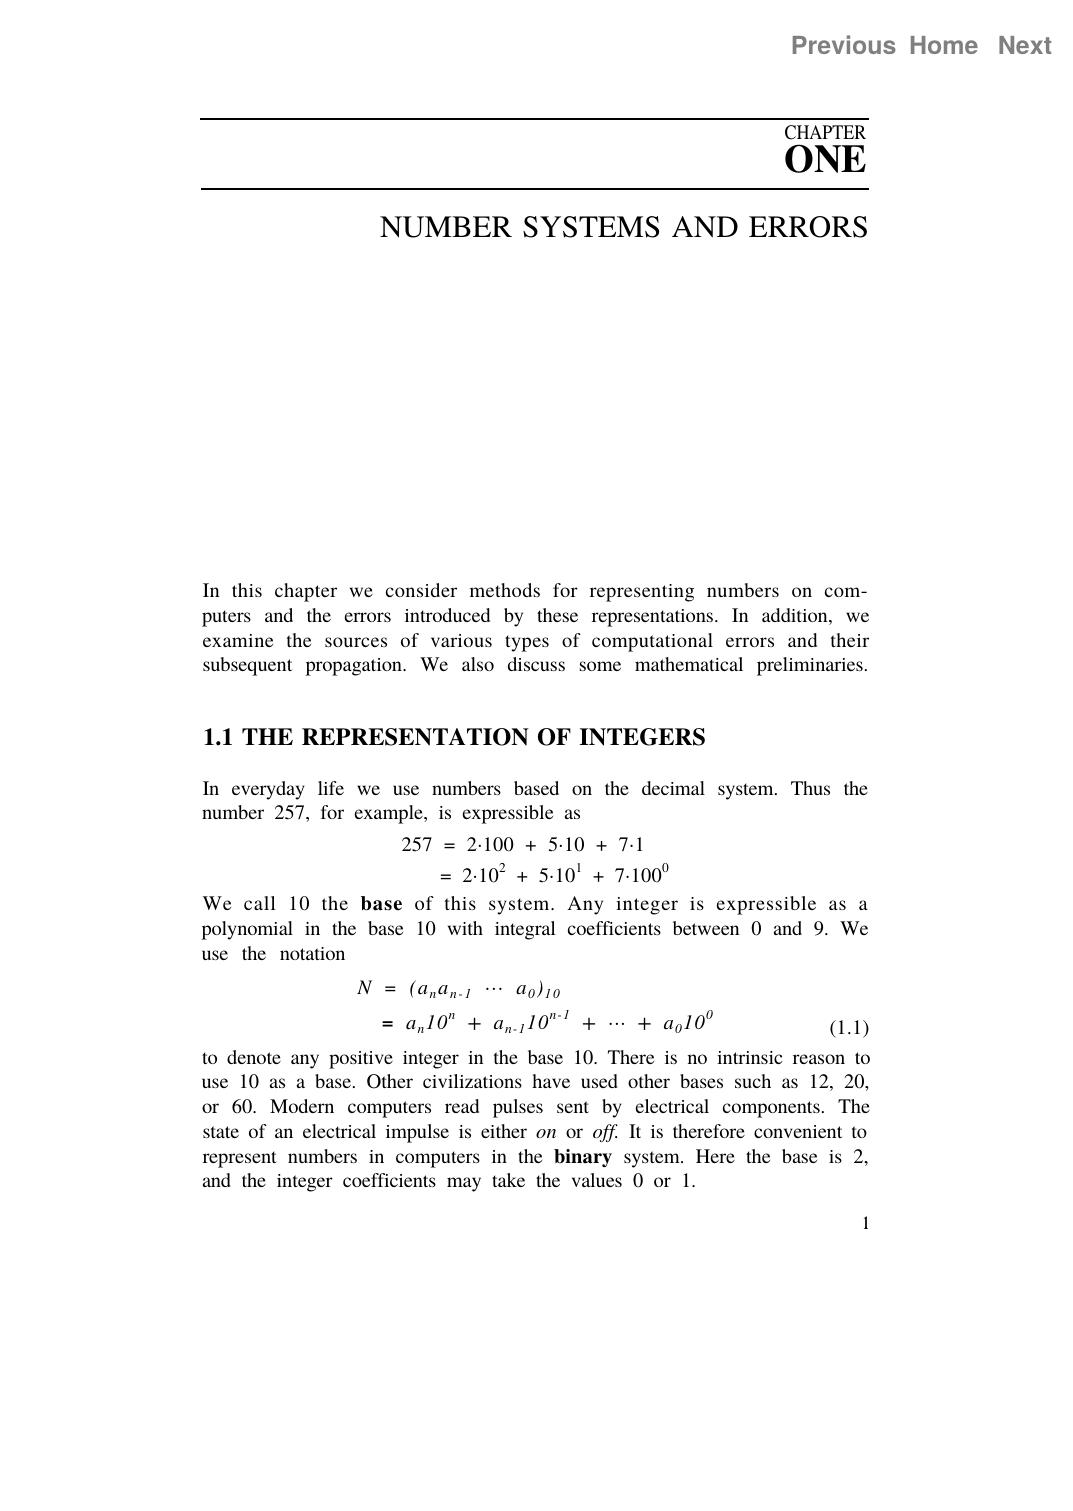 International Series in Pure & Applied Mathematics - Chapter 1. Number Systems and Errors by S. D. Conte Care de Boor